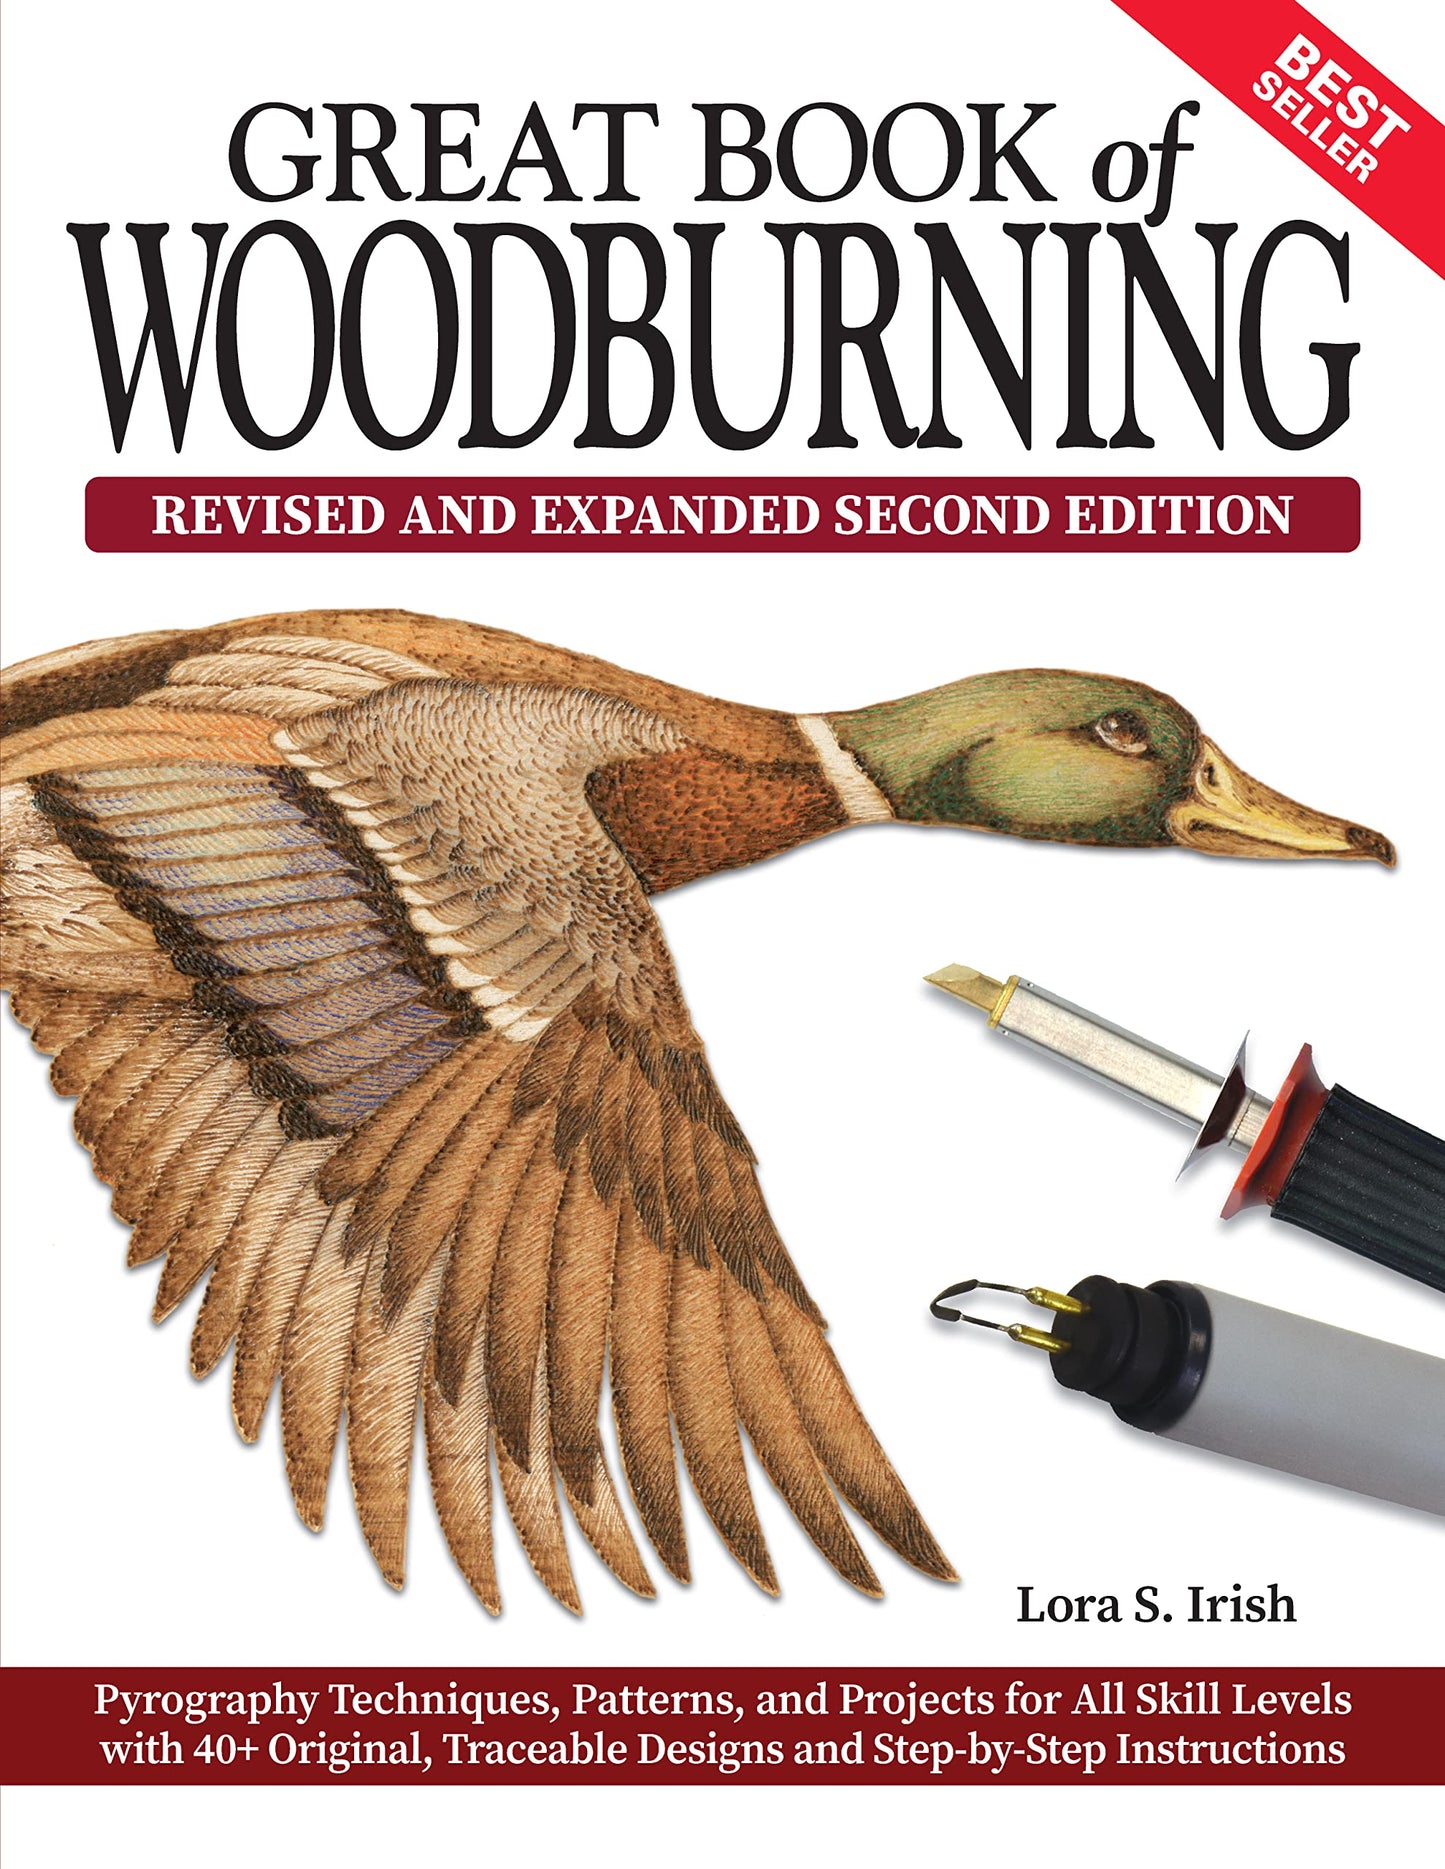 Great Book of Woodburning, Revised and Expanded Second Edition: Pyrography Techniques, Patterns, and Projects for All Skill Levels with 40+ Original, Traceable Designs and Step-by-Step Instructions